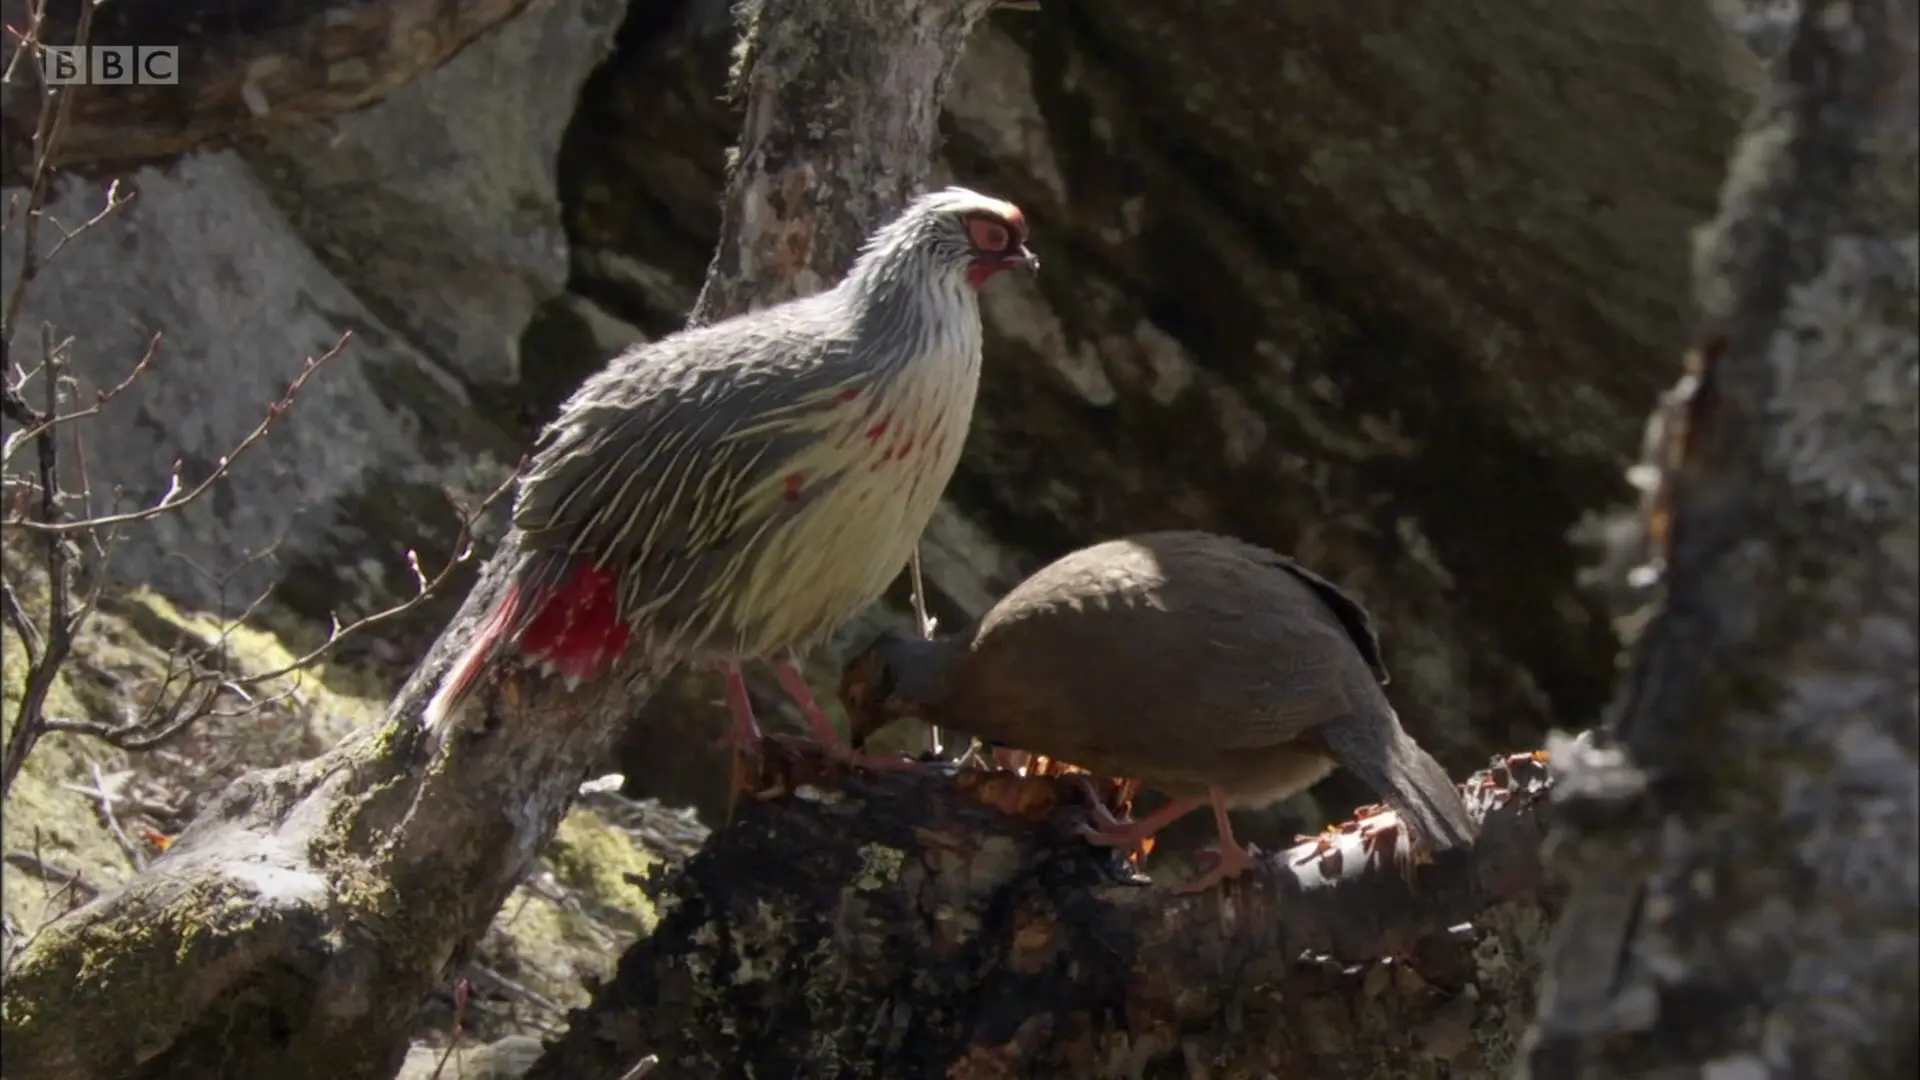 Blood pheasant (Ithaginis cruentus) as shown in Planet Earth - Mountains